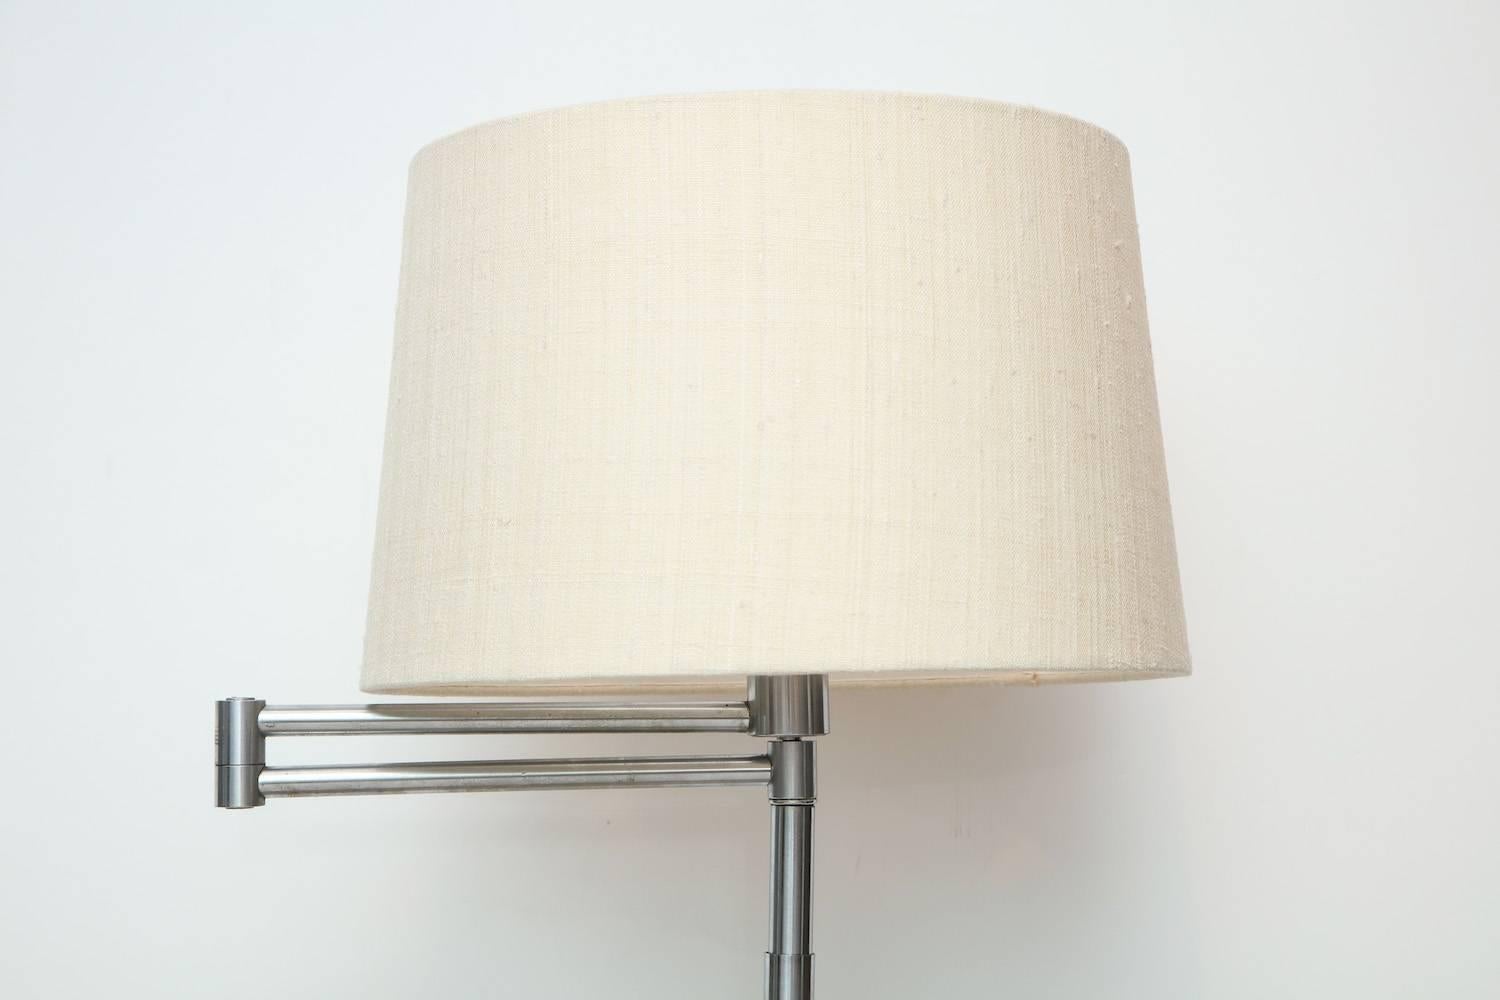 Early swing arm floor lamp by Nessen Studio. Oxidized chrome lamp with swing-arm feature and original bakelite turn switch. Recently polished out, with new sockets, wiring and linen shade. A fantastic early example of an iconic design. Signed on